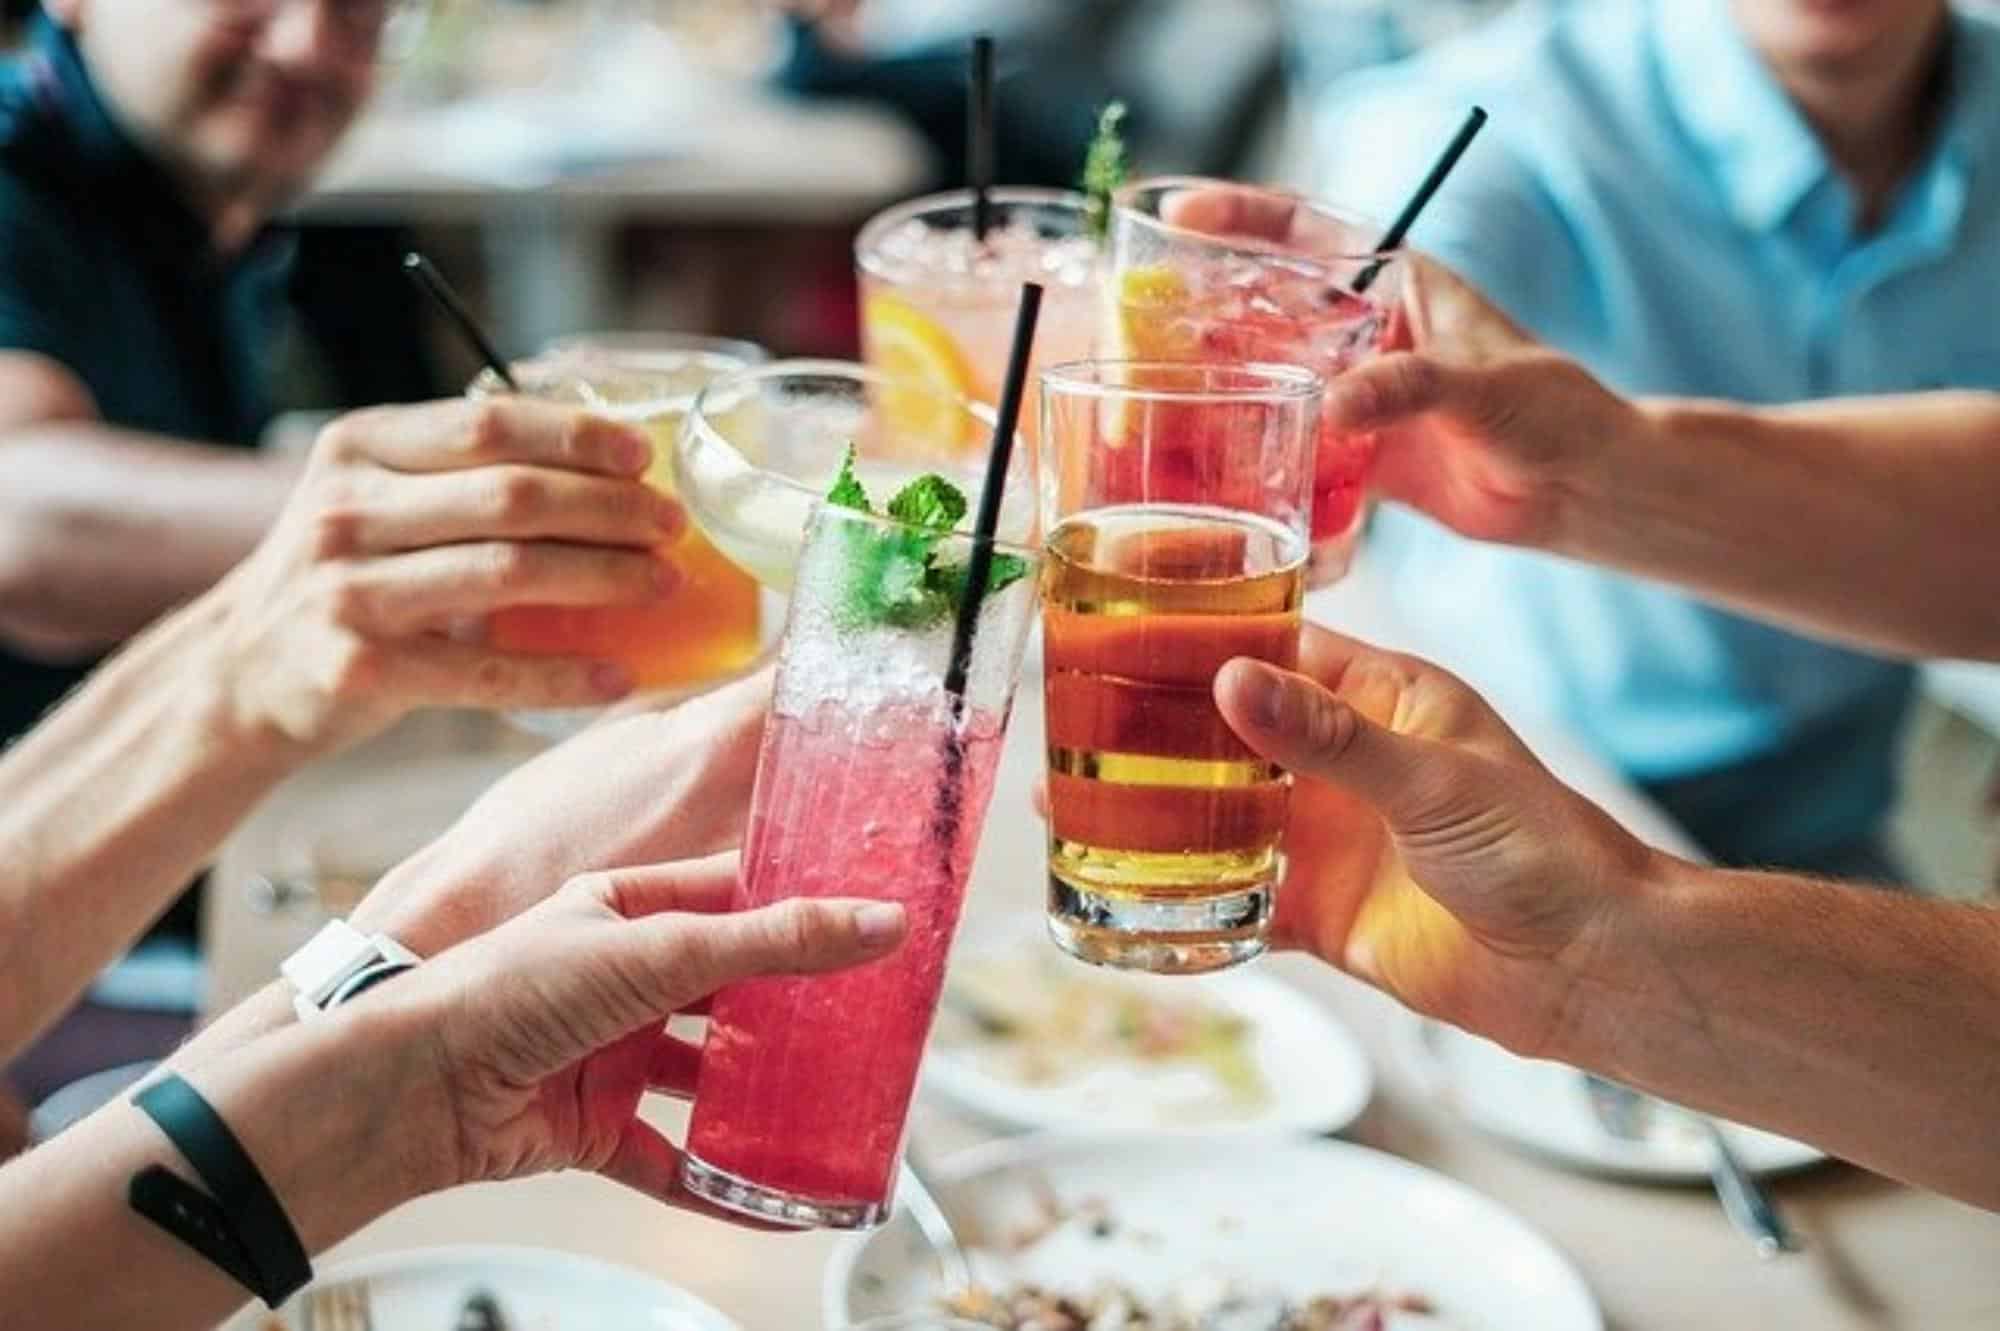 Alcohol consumption is often part of social life